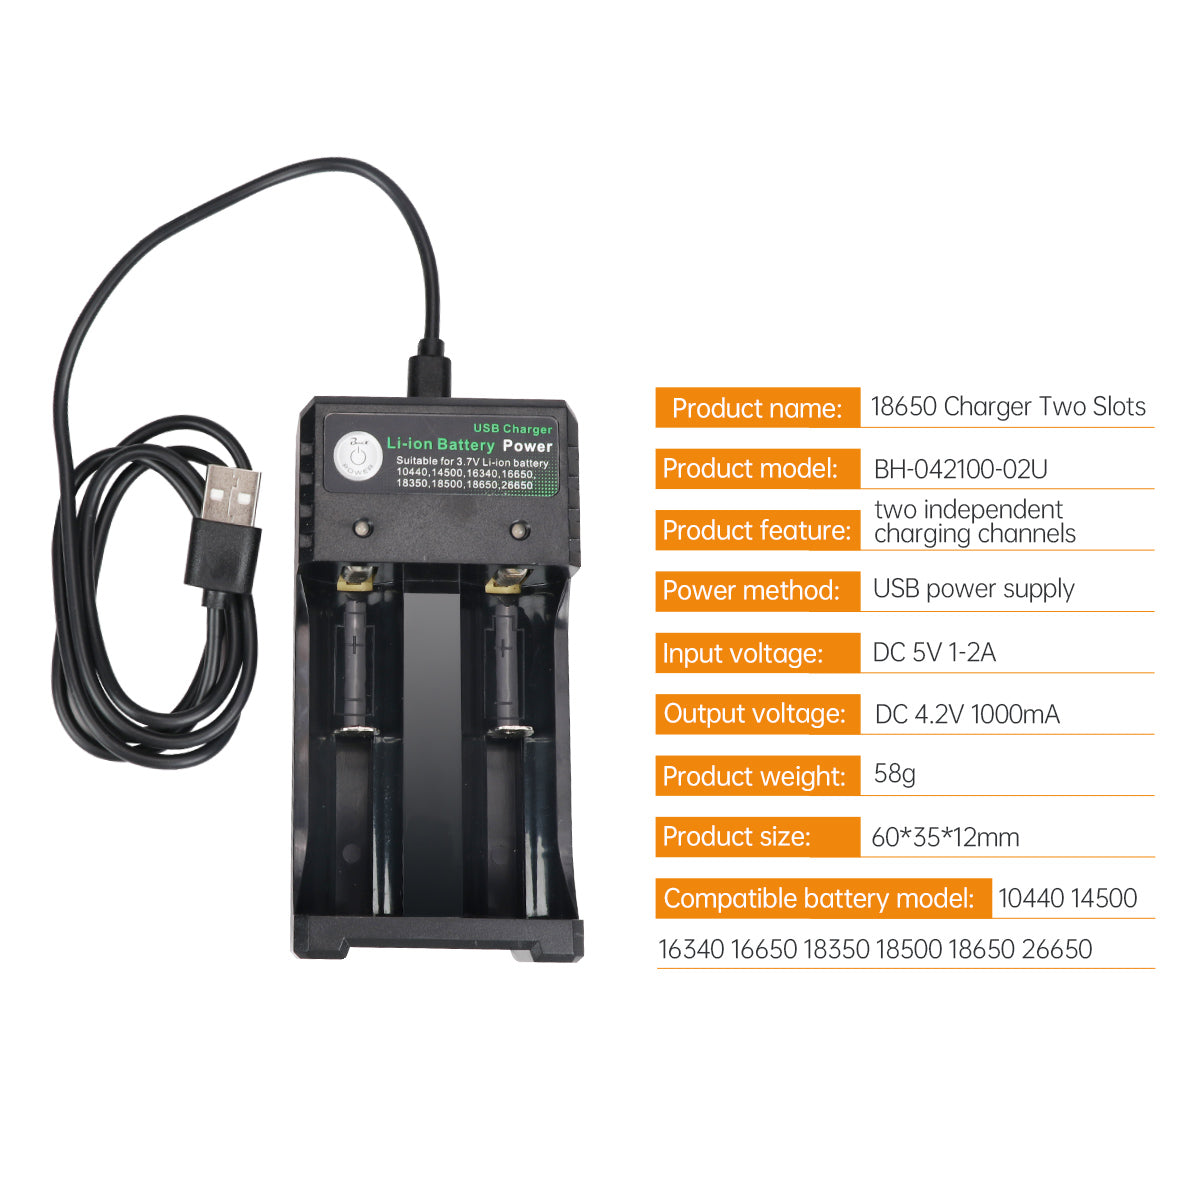 Li-ion Battery Power 2-Slots 18650 Battery Charger with USB